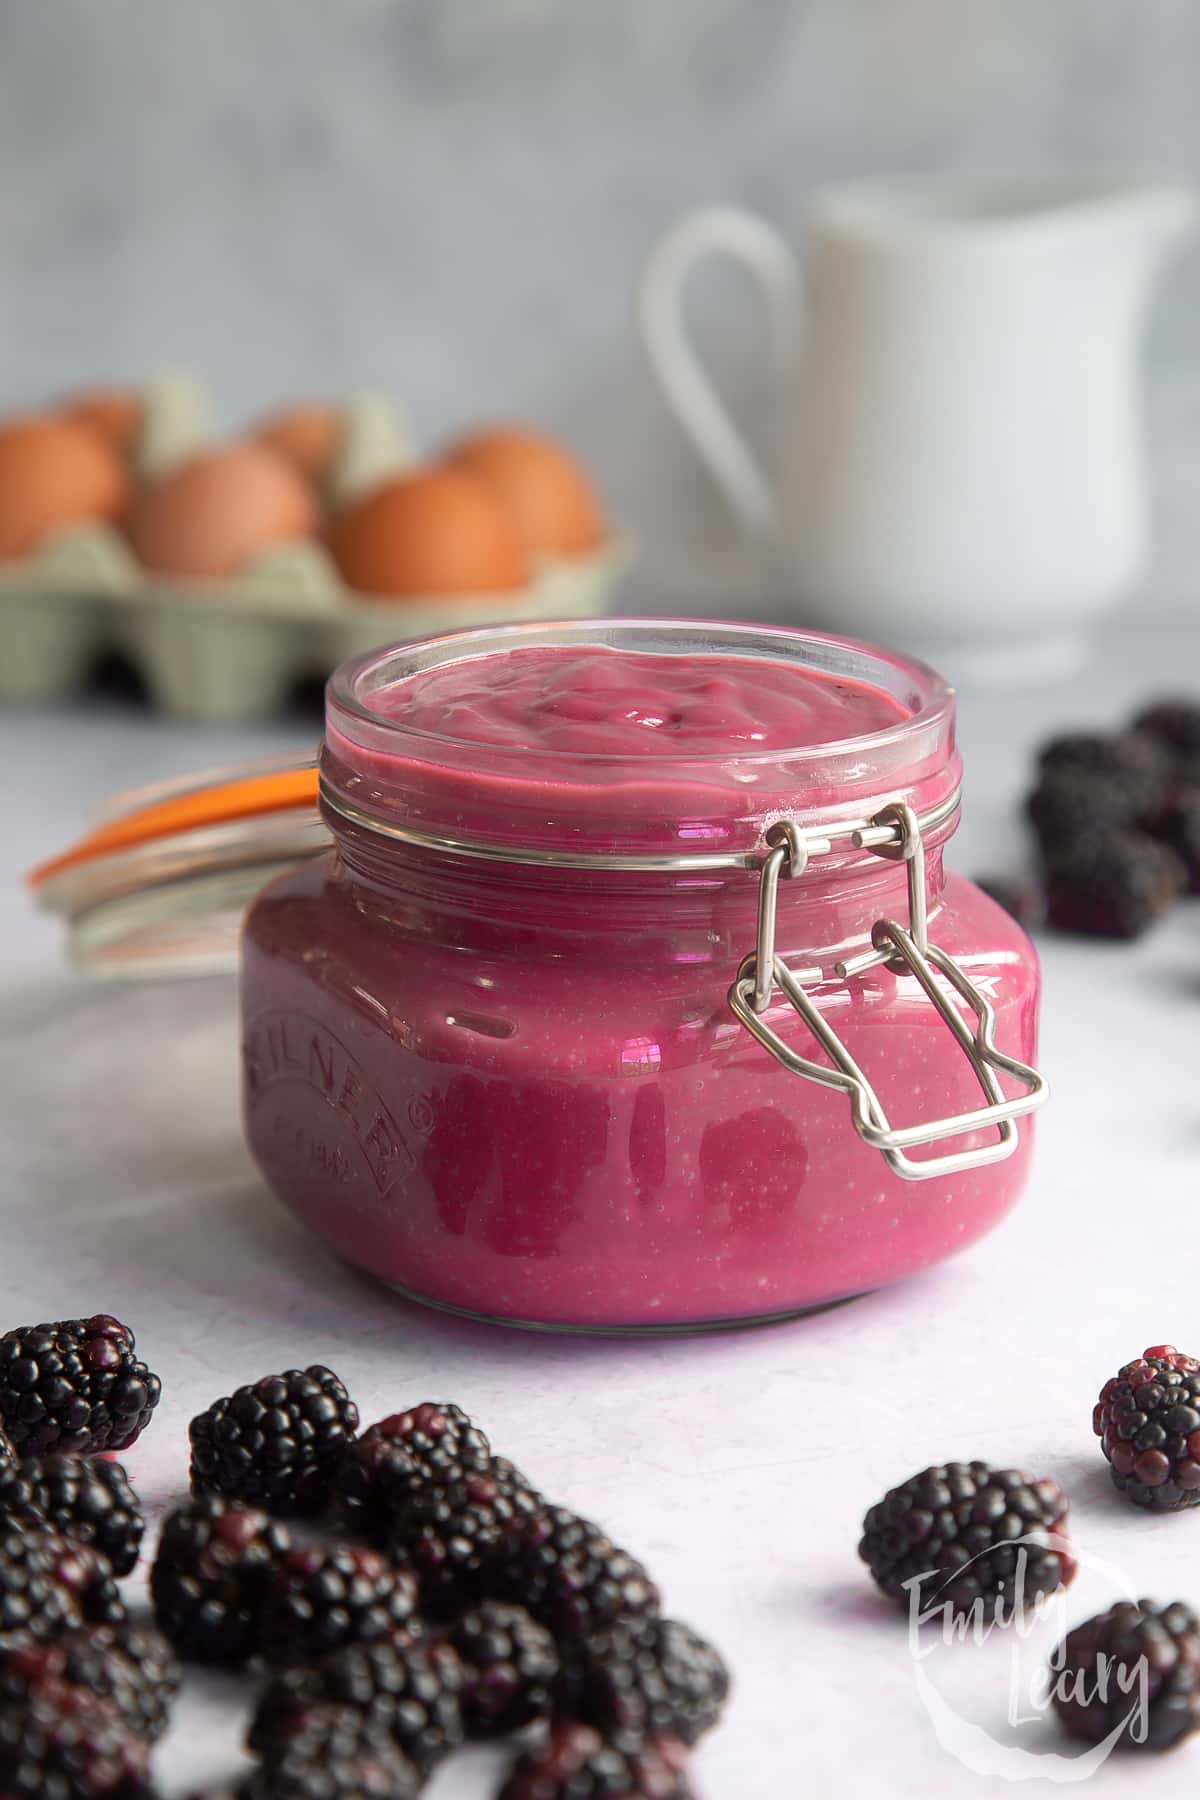 Blackberry curd in a glass jar surrounded by blackberries.